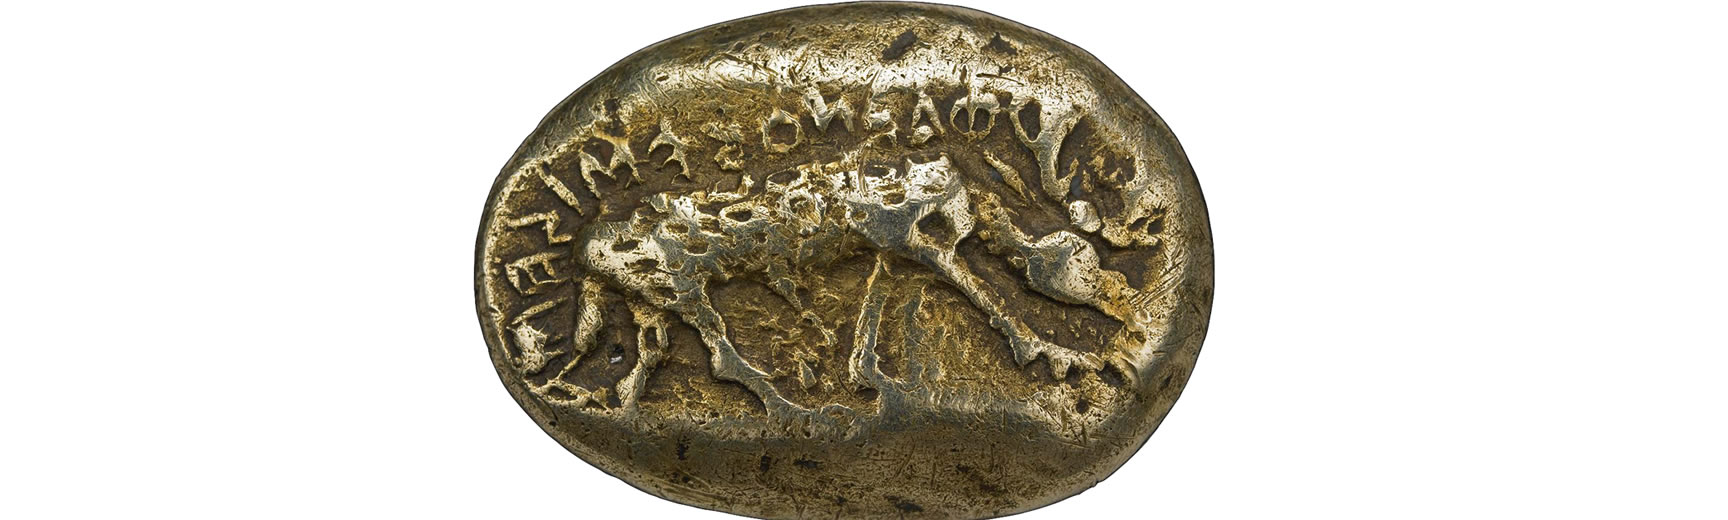 Electrum stater bearing the legend ‘I am the Seal of Phanes’, perhaps produced in Ephesus in the mid 7th century BC. BNK, G.950. Courtesy of the Trustees of the British Museum